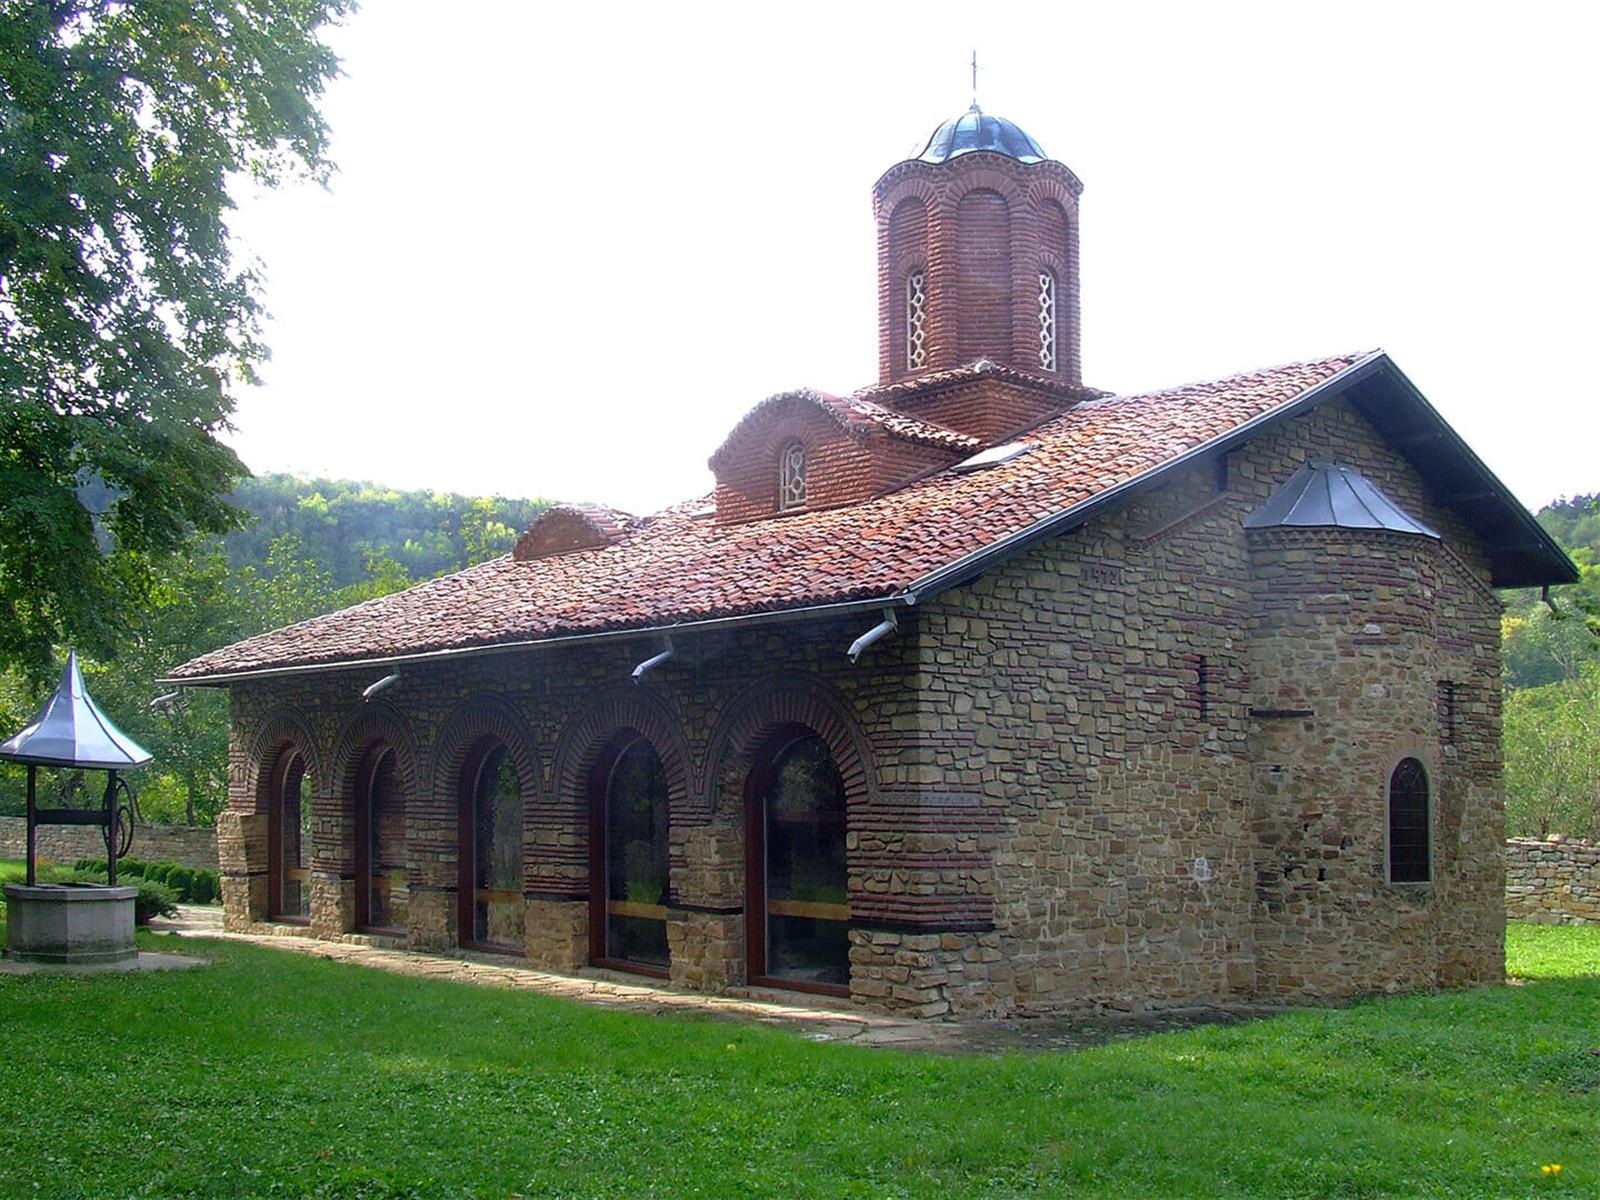 Church of Ss. Peter and Paul and Church of St. Ivan Rilski